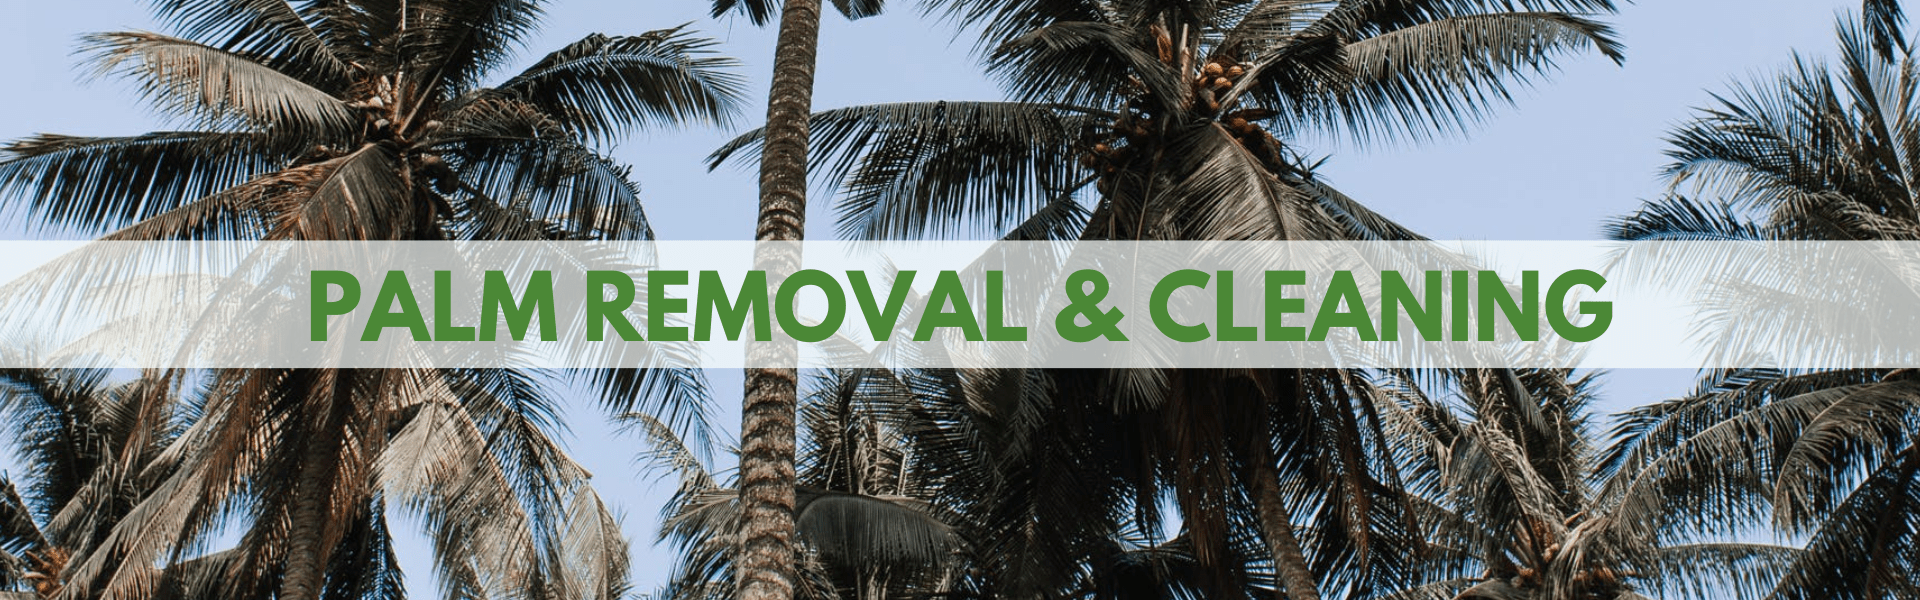 Palm-Removal